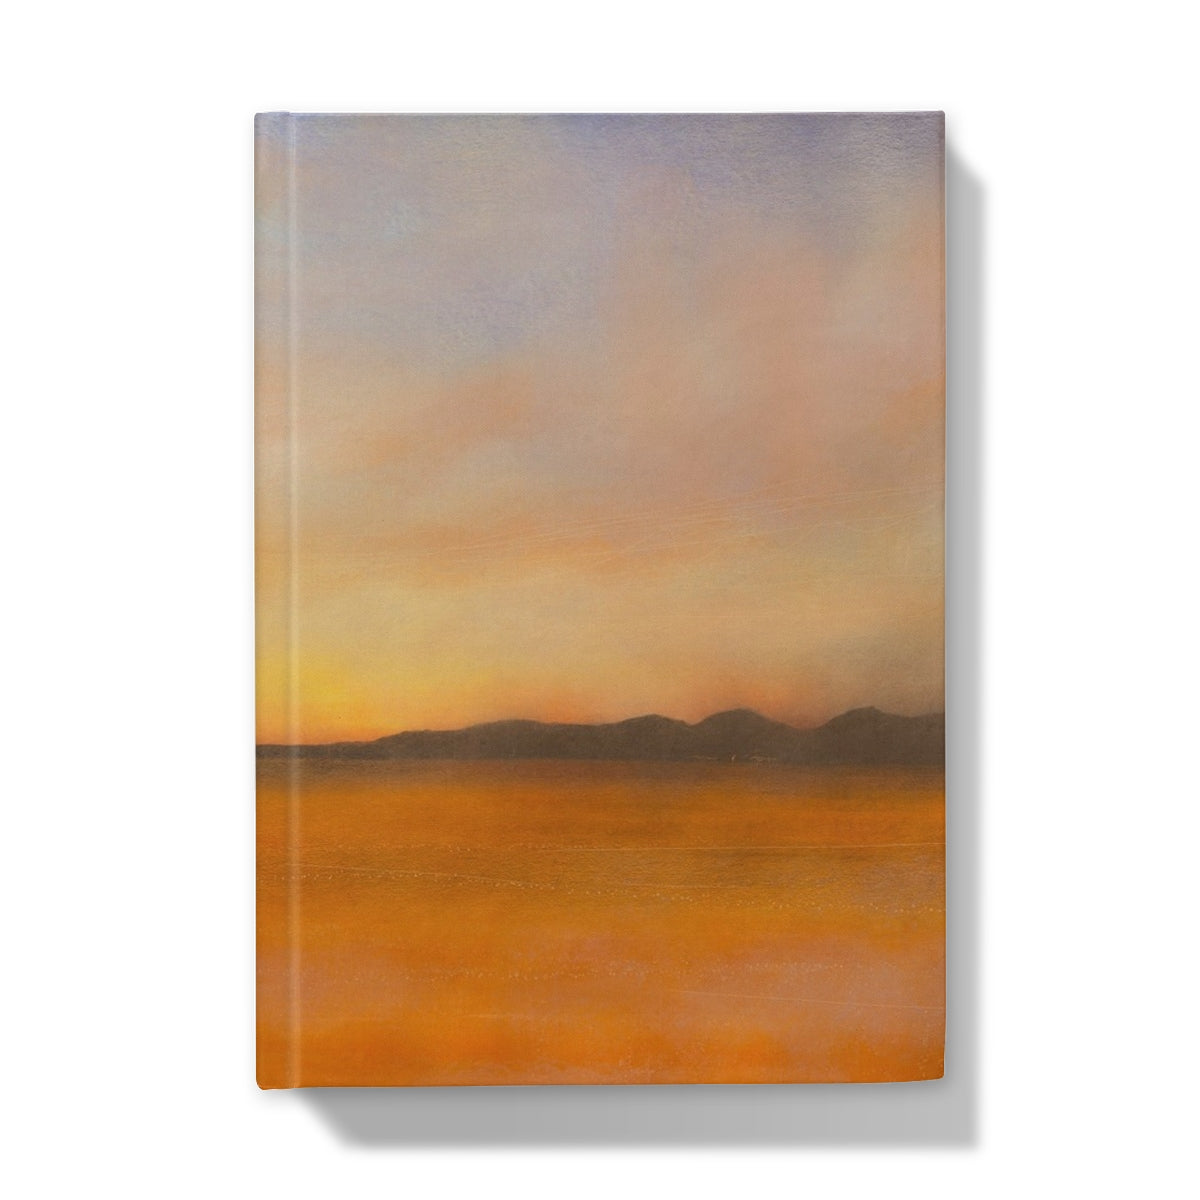 Islay Dawn Art Gifts Hardback Journal-Journals & Notebooks-Hebridean Islands Art Gallery-A5-Lined-Paintings, Prints, Homeware, Art Gifts From Scotland By Scottish Artist Kevin Hunter